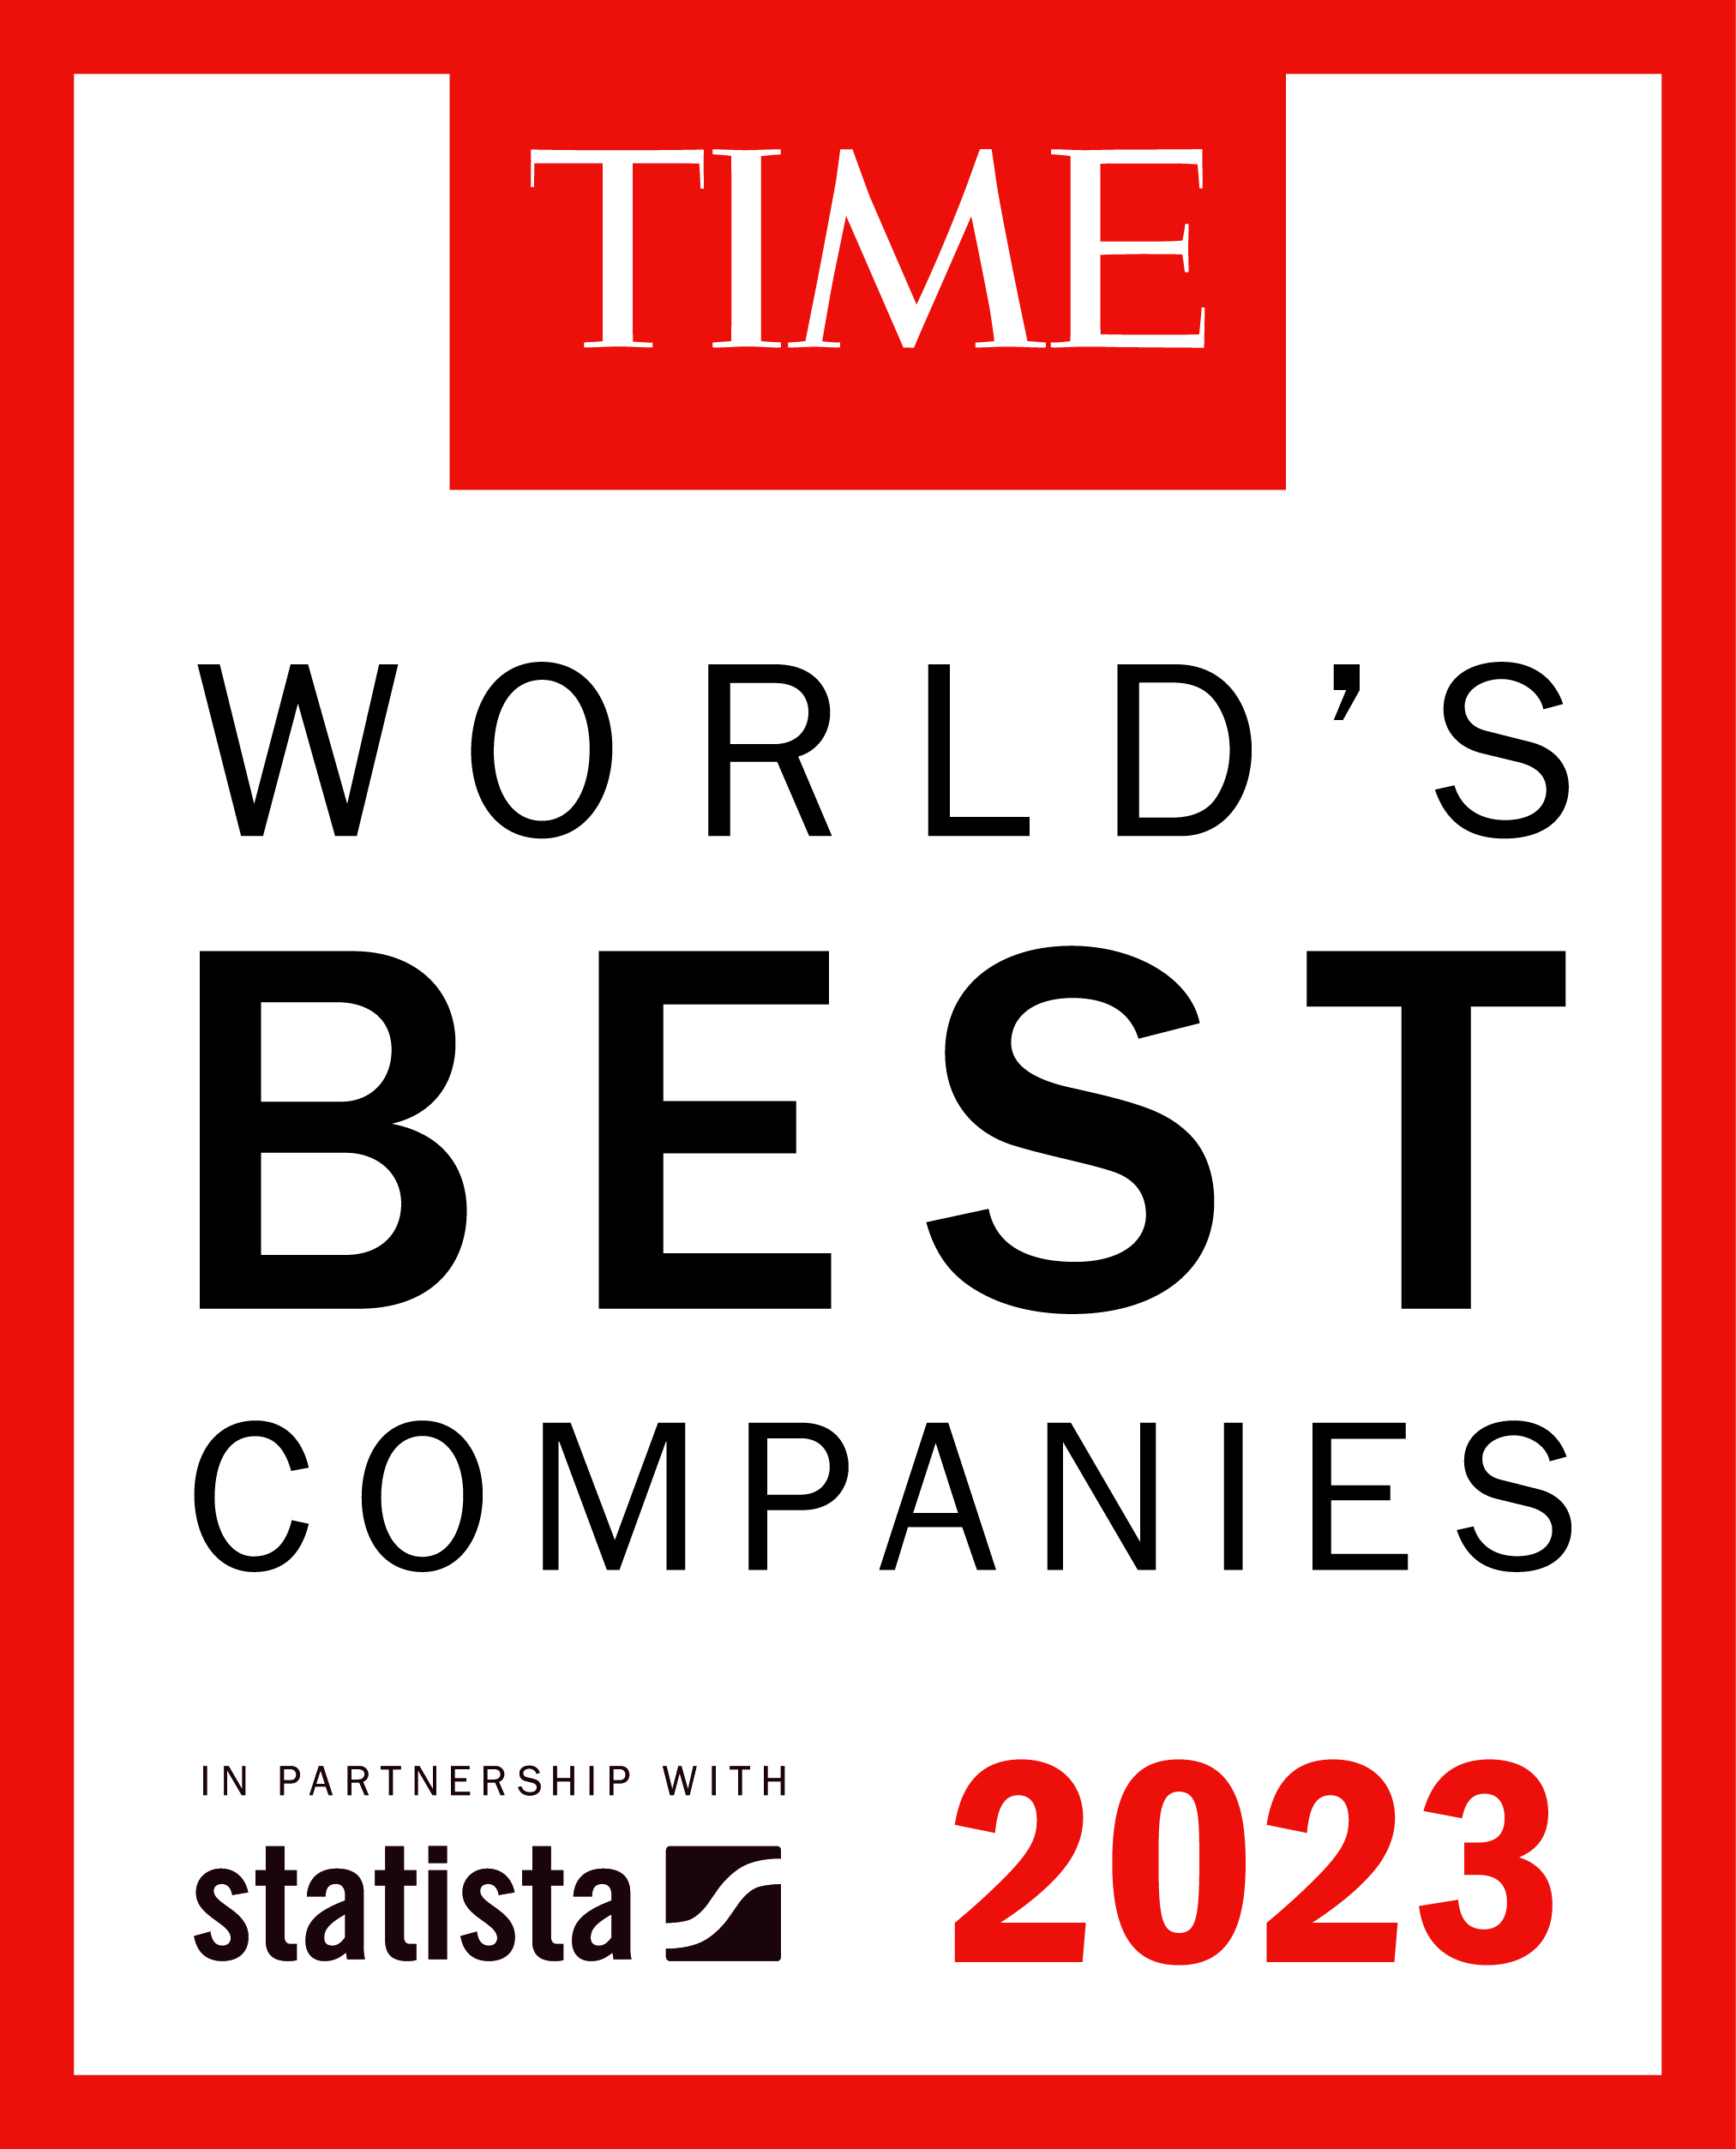 TIME World's Best Company 2023